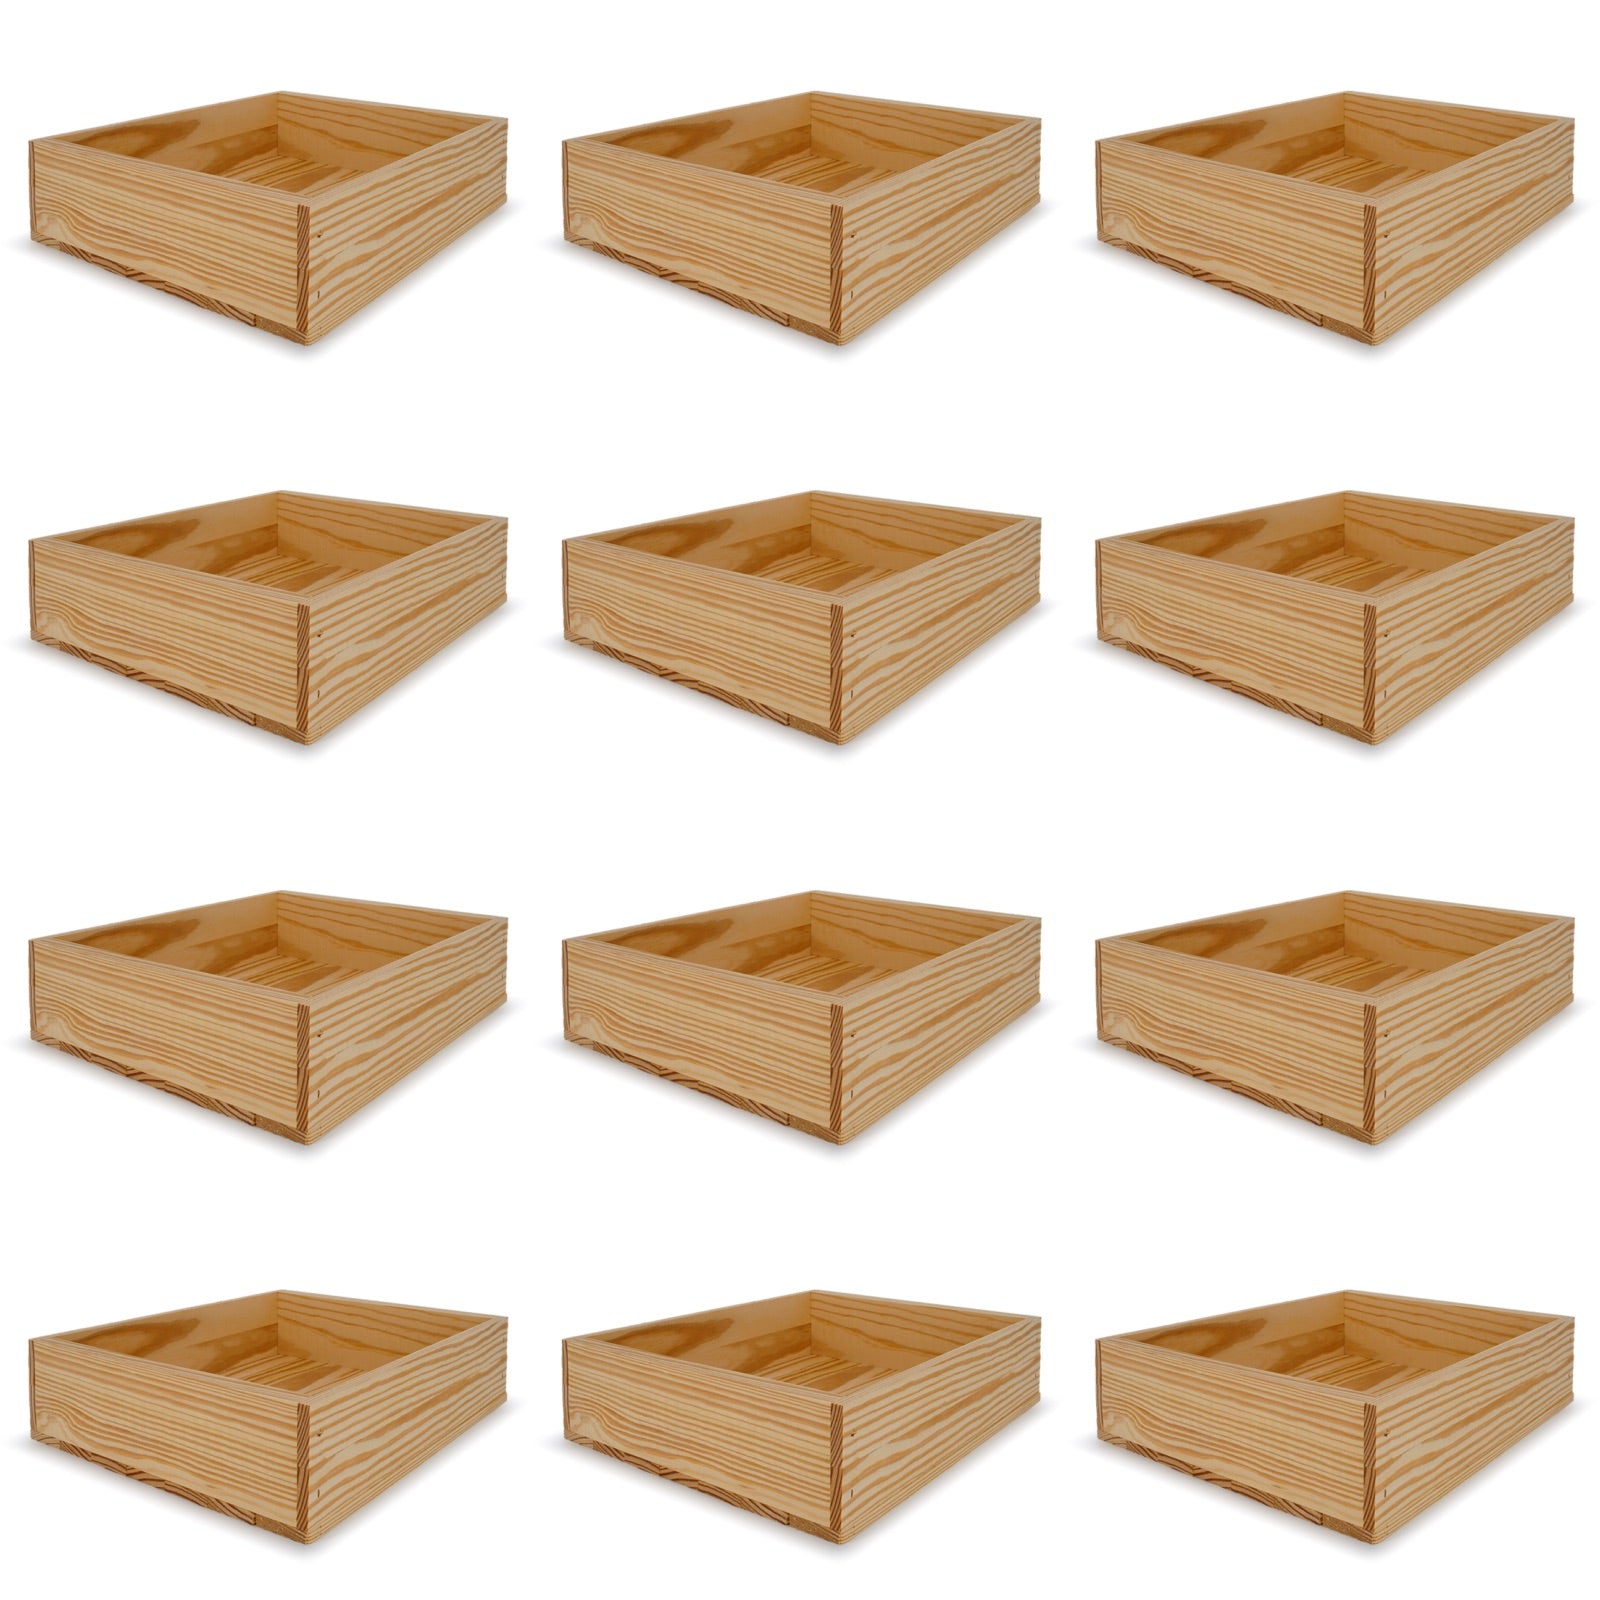 12 Small wooden crates 14x11.5x3.5